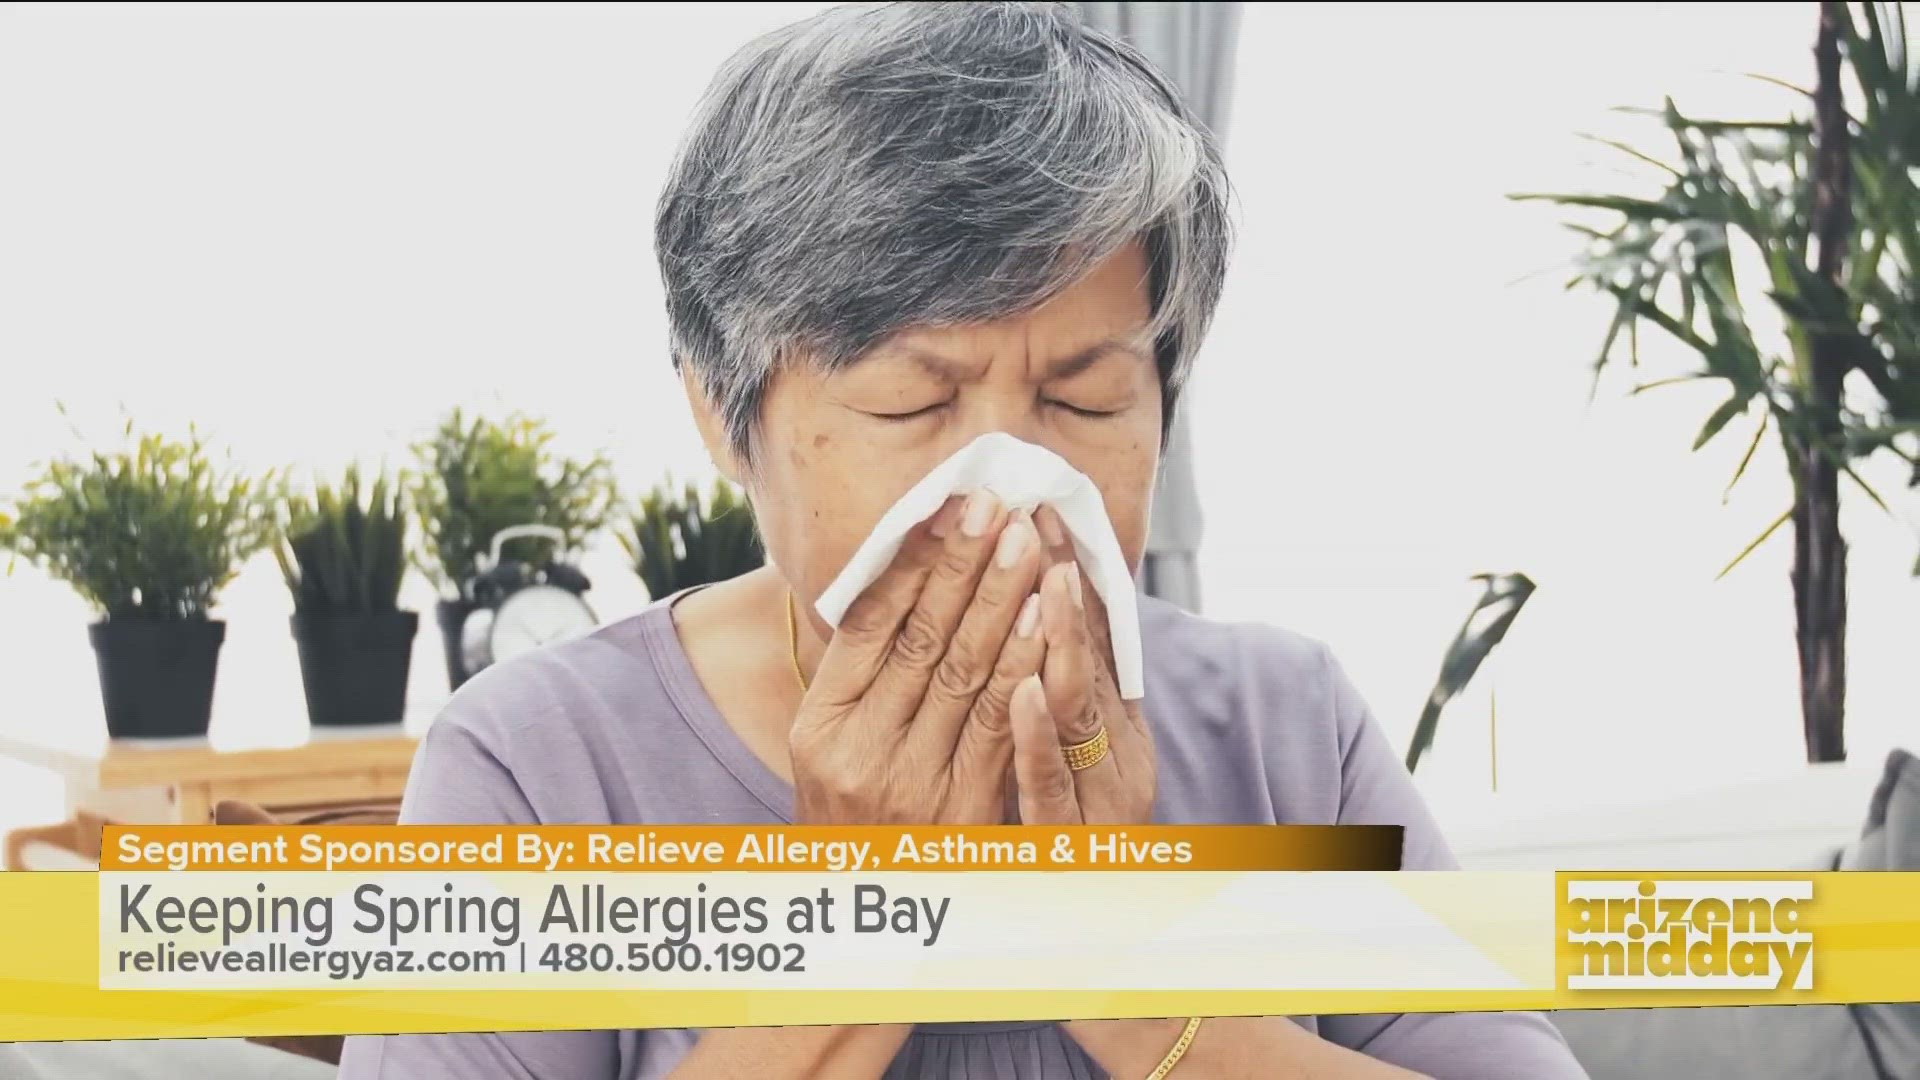 Dr. Julie Wendt from Relieve Allergy explains the different types of allergies, how to manage them, and when to see a professional.